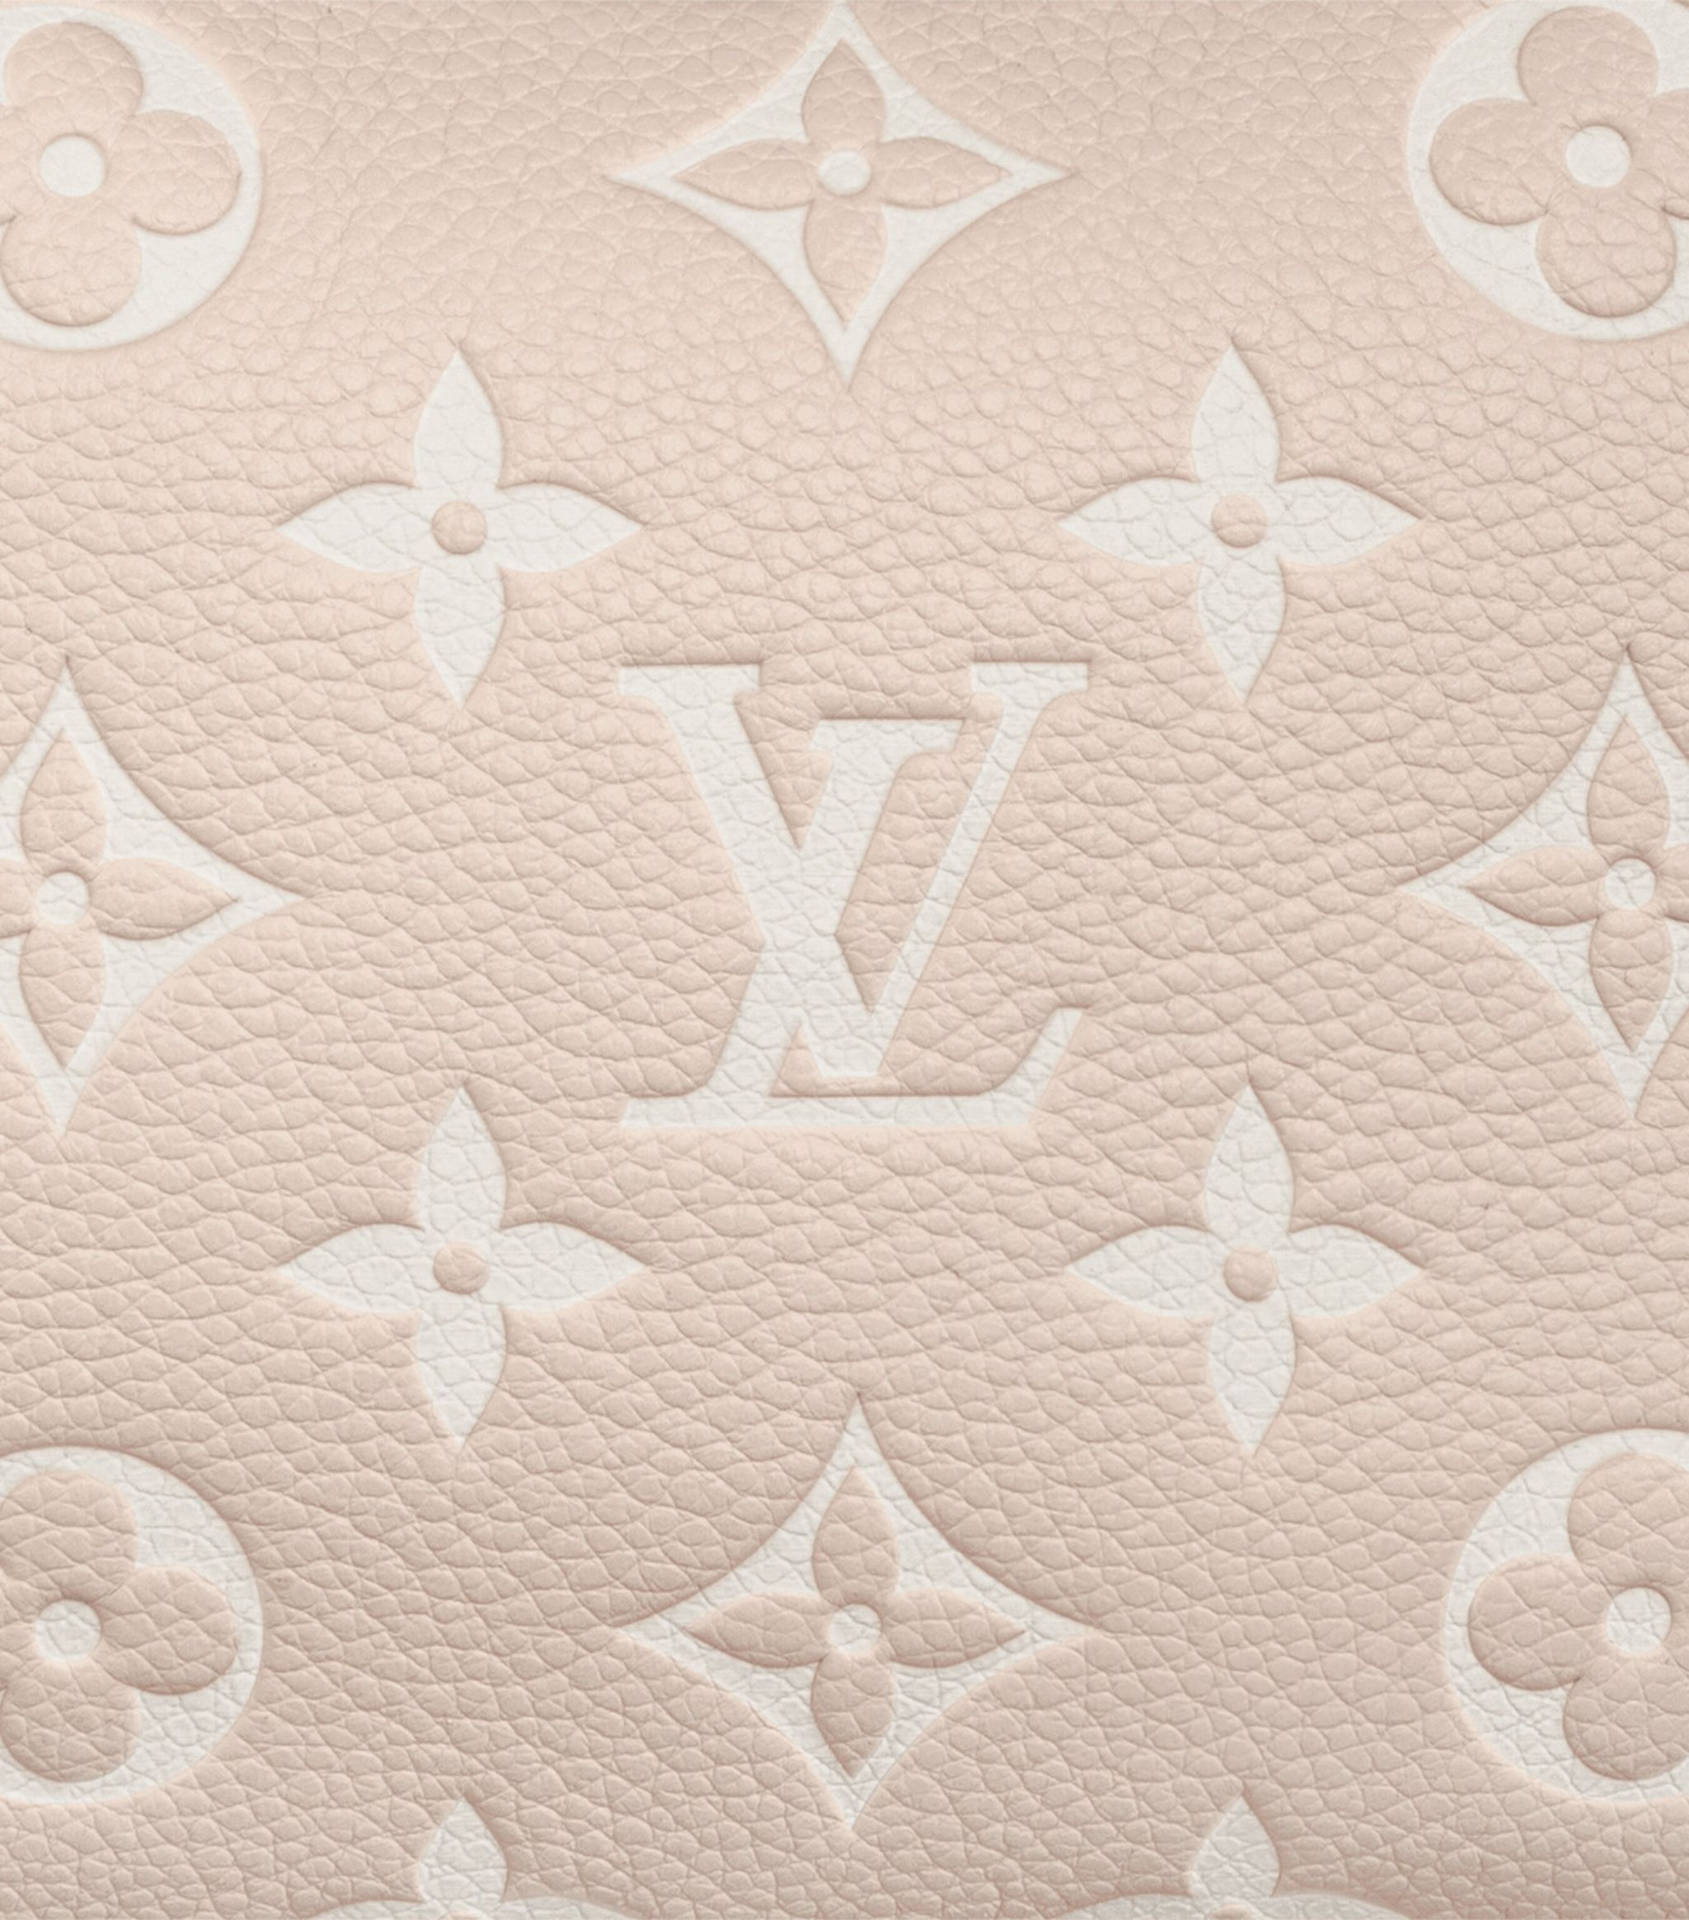 Download Stay stylish and sophisticated with Louis Vuitton Aesthetic.  Wallpaper